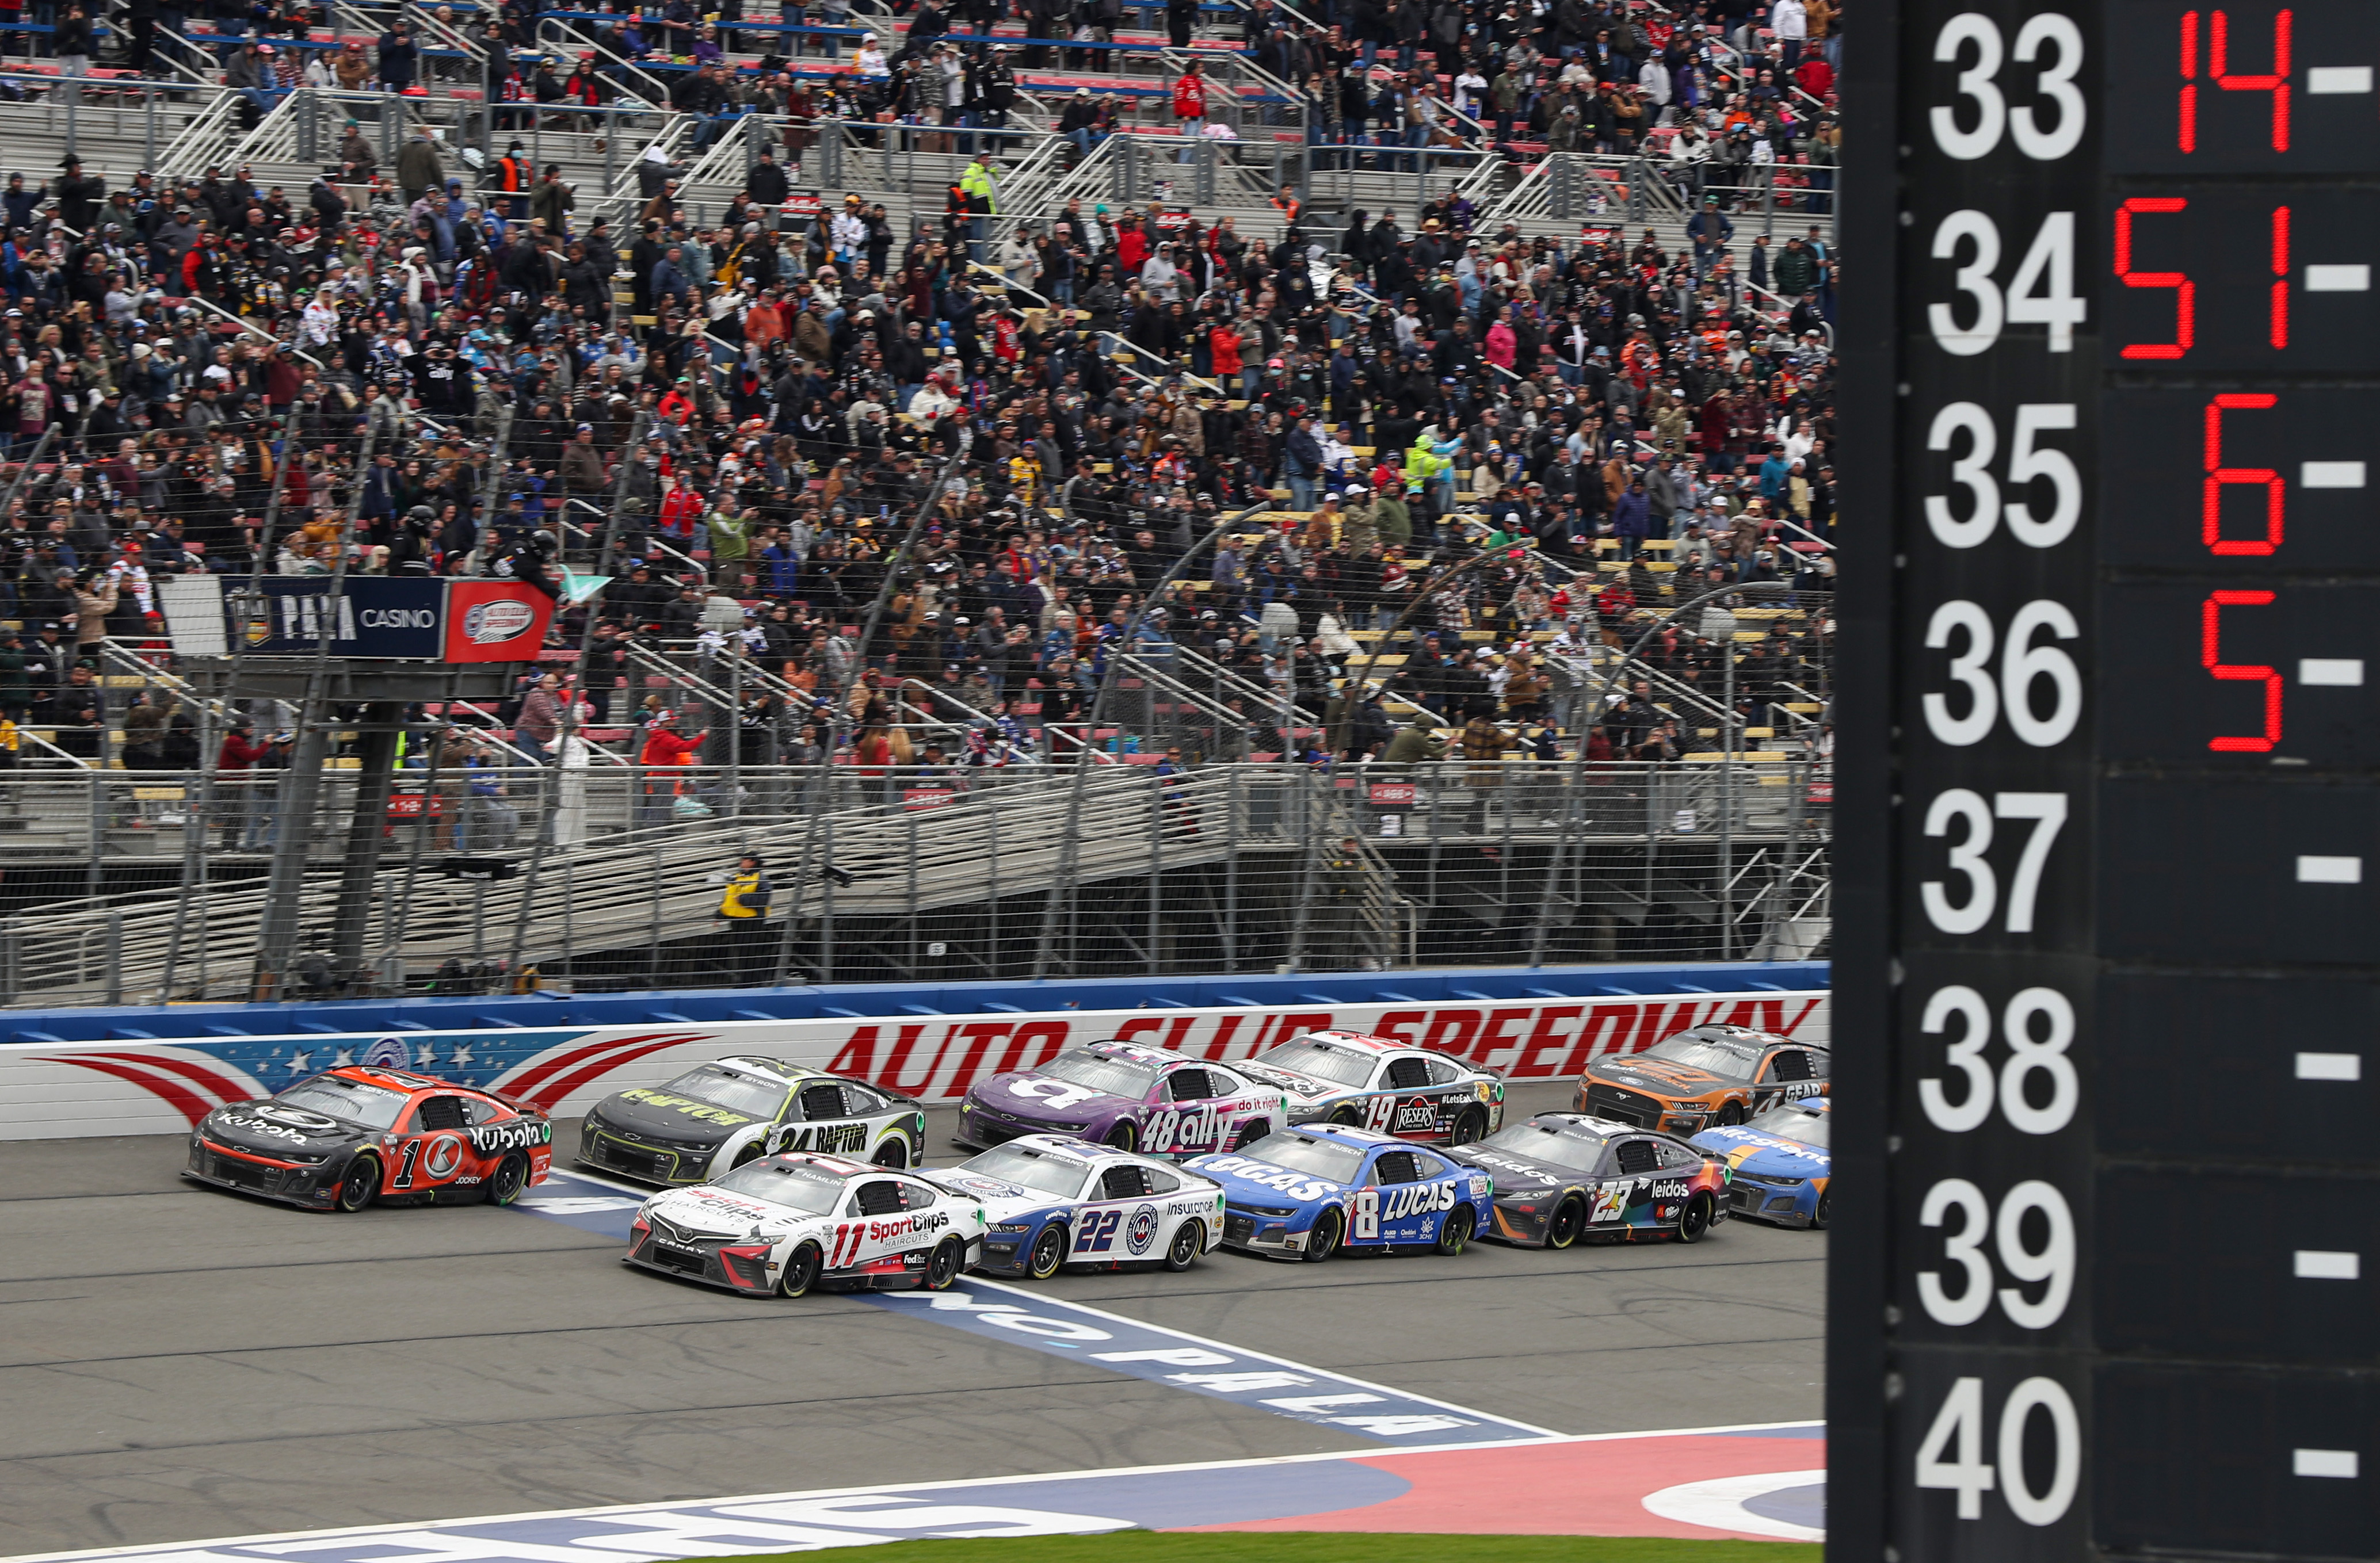 Ross Chastain, driver of the #1 Kubota Chevrolet, leads the field to start stage two after winning stage one during the NASCAR Cup Series Pala Casino 400 at Auto Club Speedway on February 26, 2023 in Fontana, California.